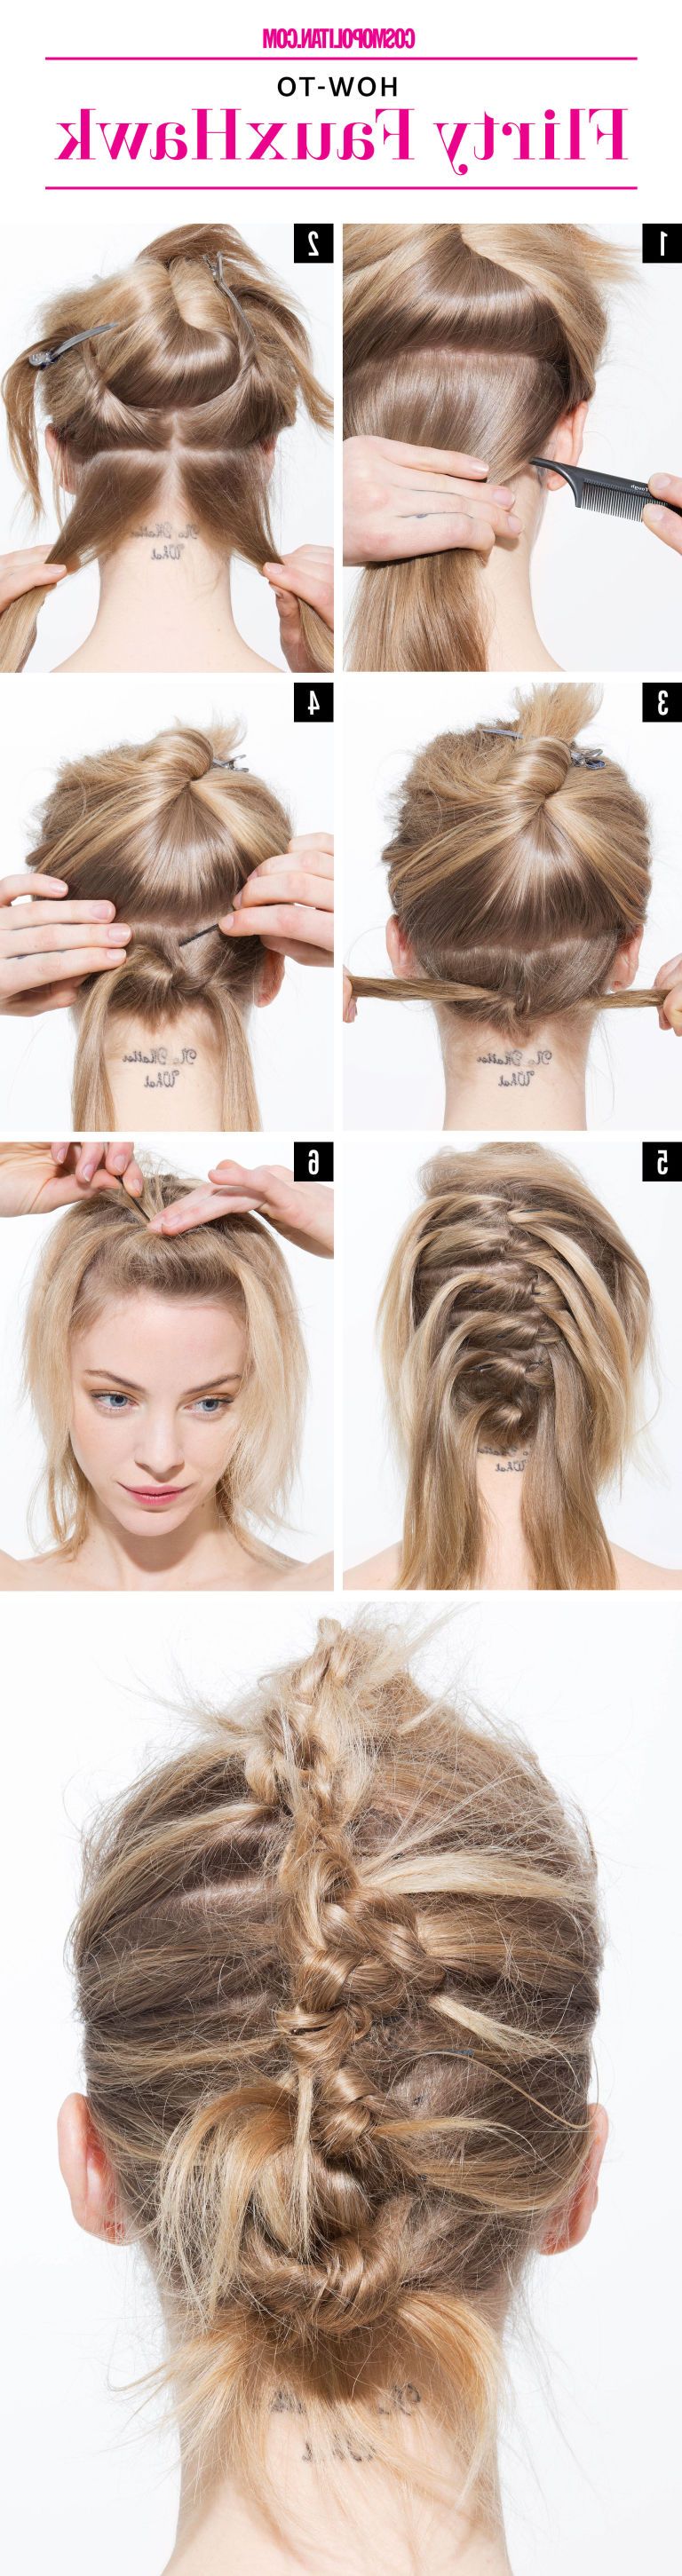 4 Last Minute Diy Evening Hairstyles That Will Leave You Looking Hot For 2017 Formal Faux Hawk Bridal Updos (View 7 of 20)